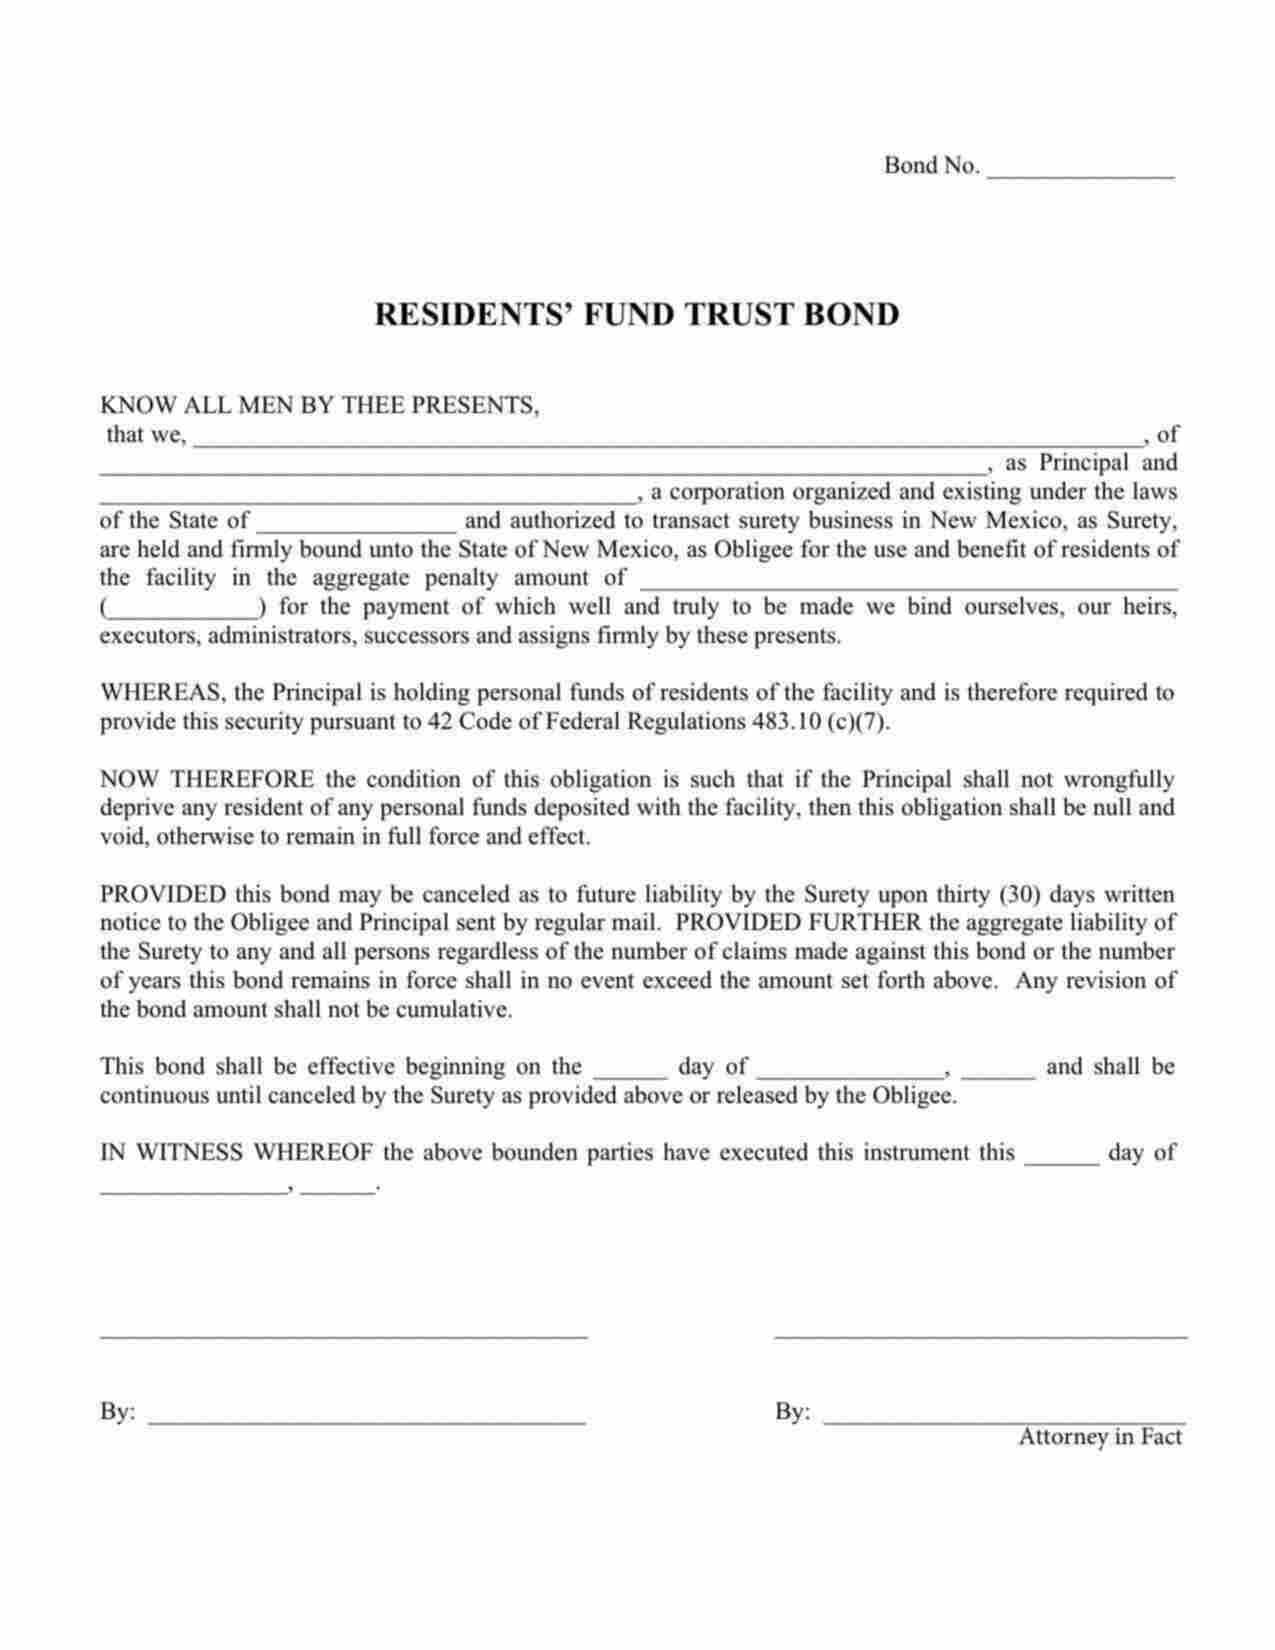 New Mexico Residents' Fund Trust Bond Form